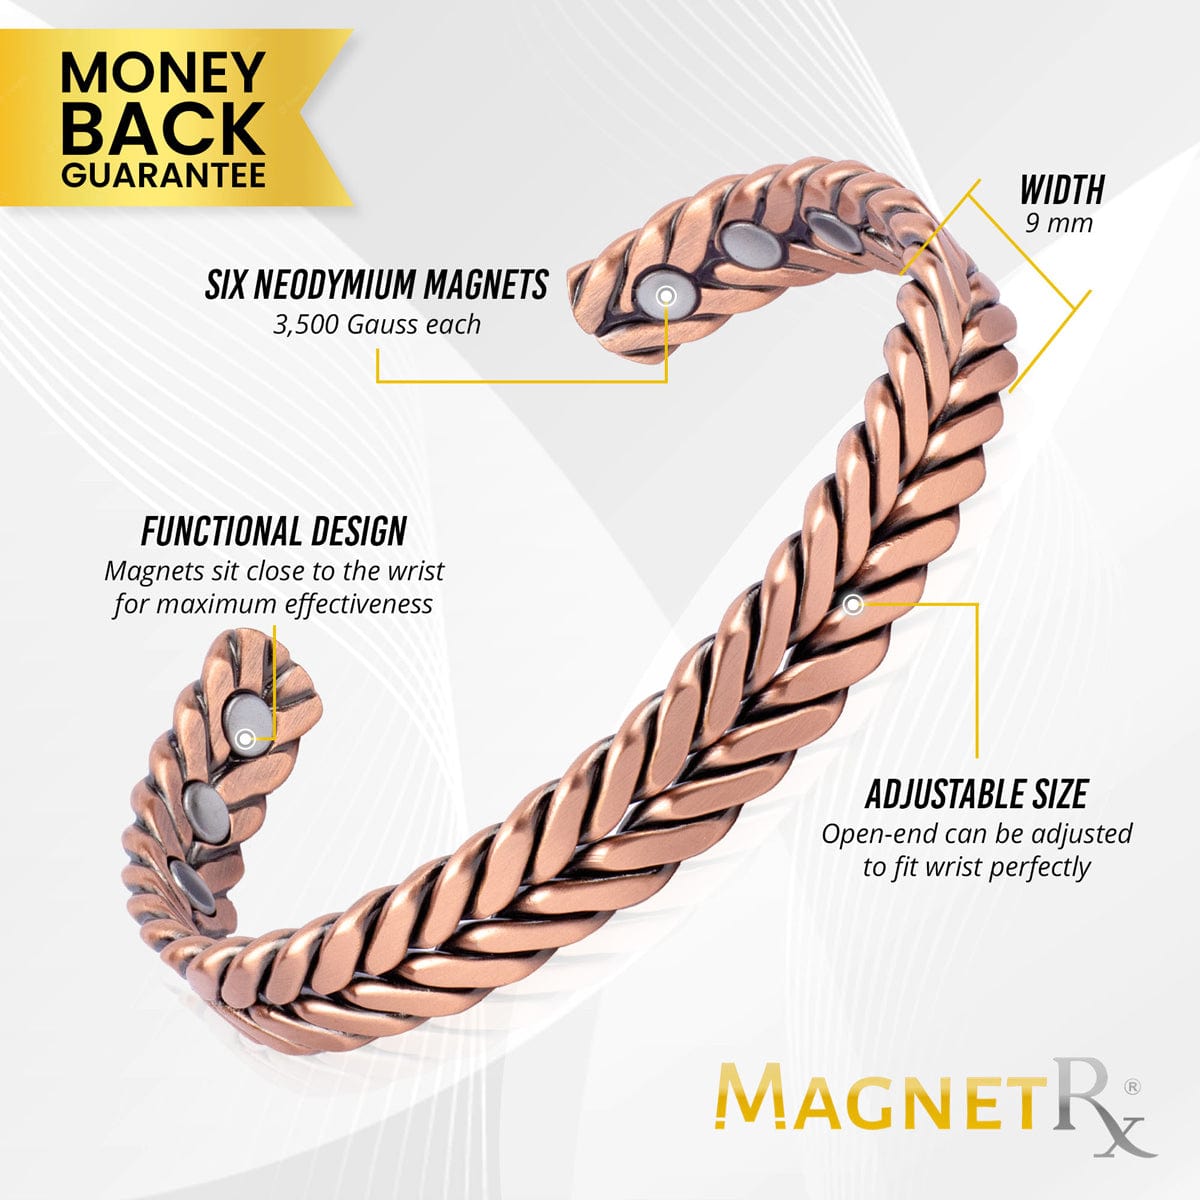 Woven Copper Magnetic Therapy Bracelet Cuff